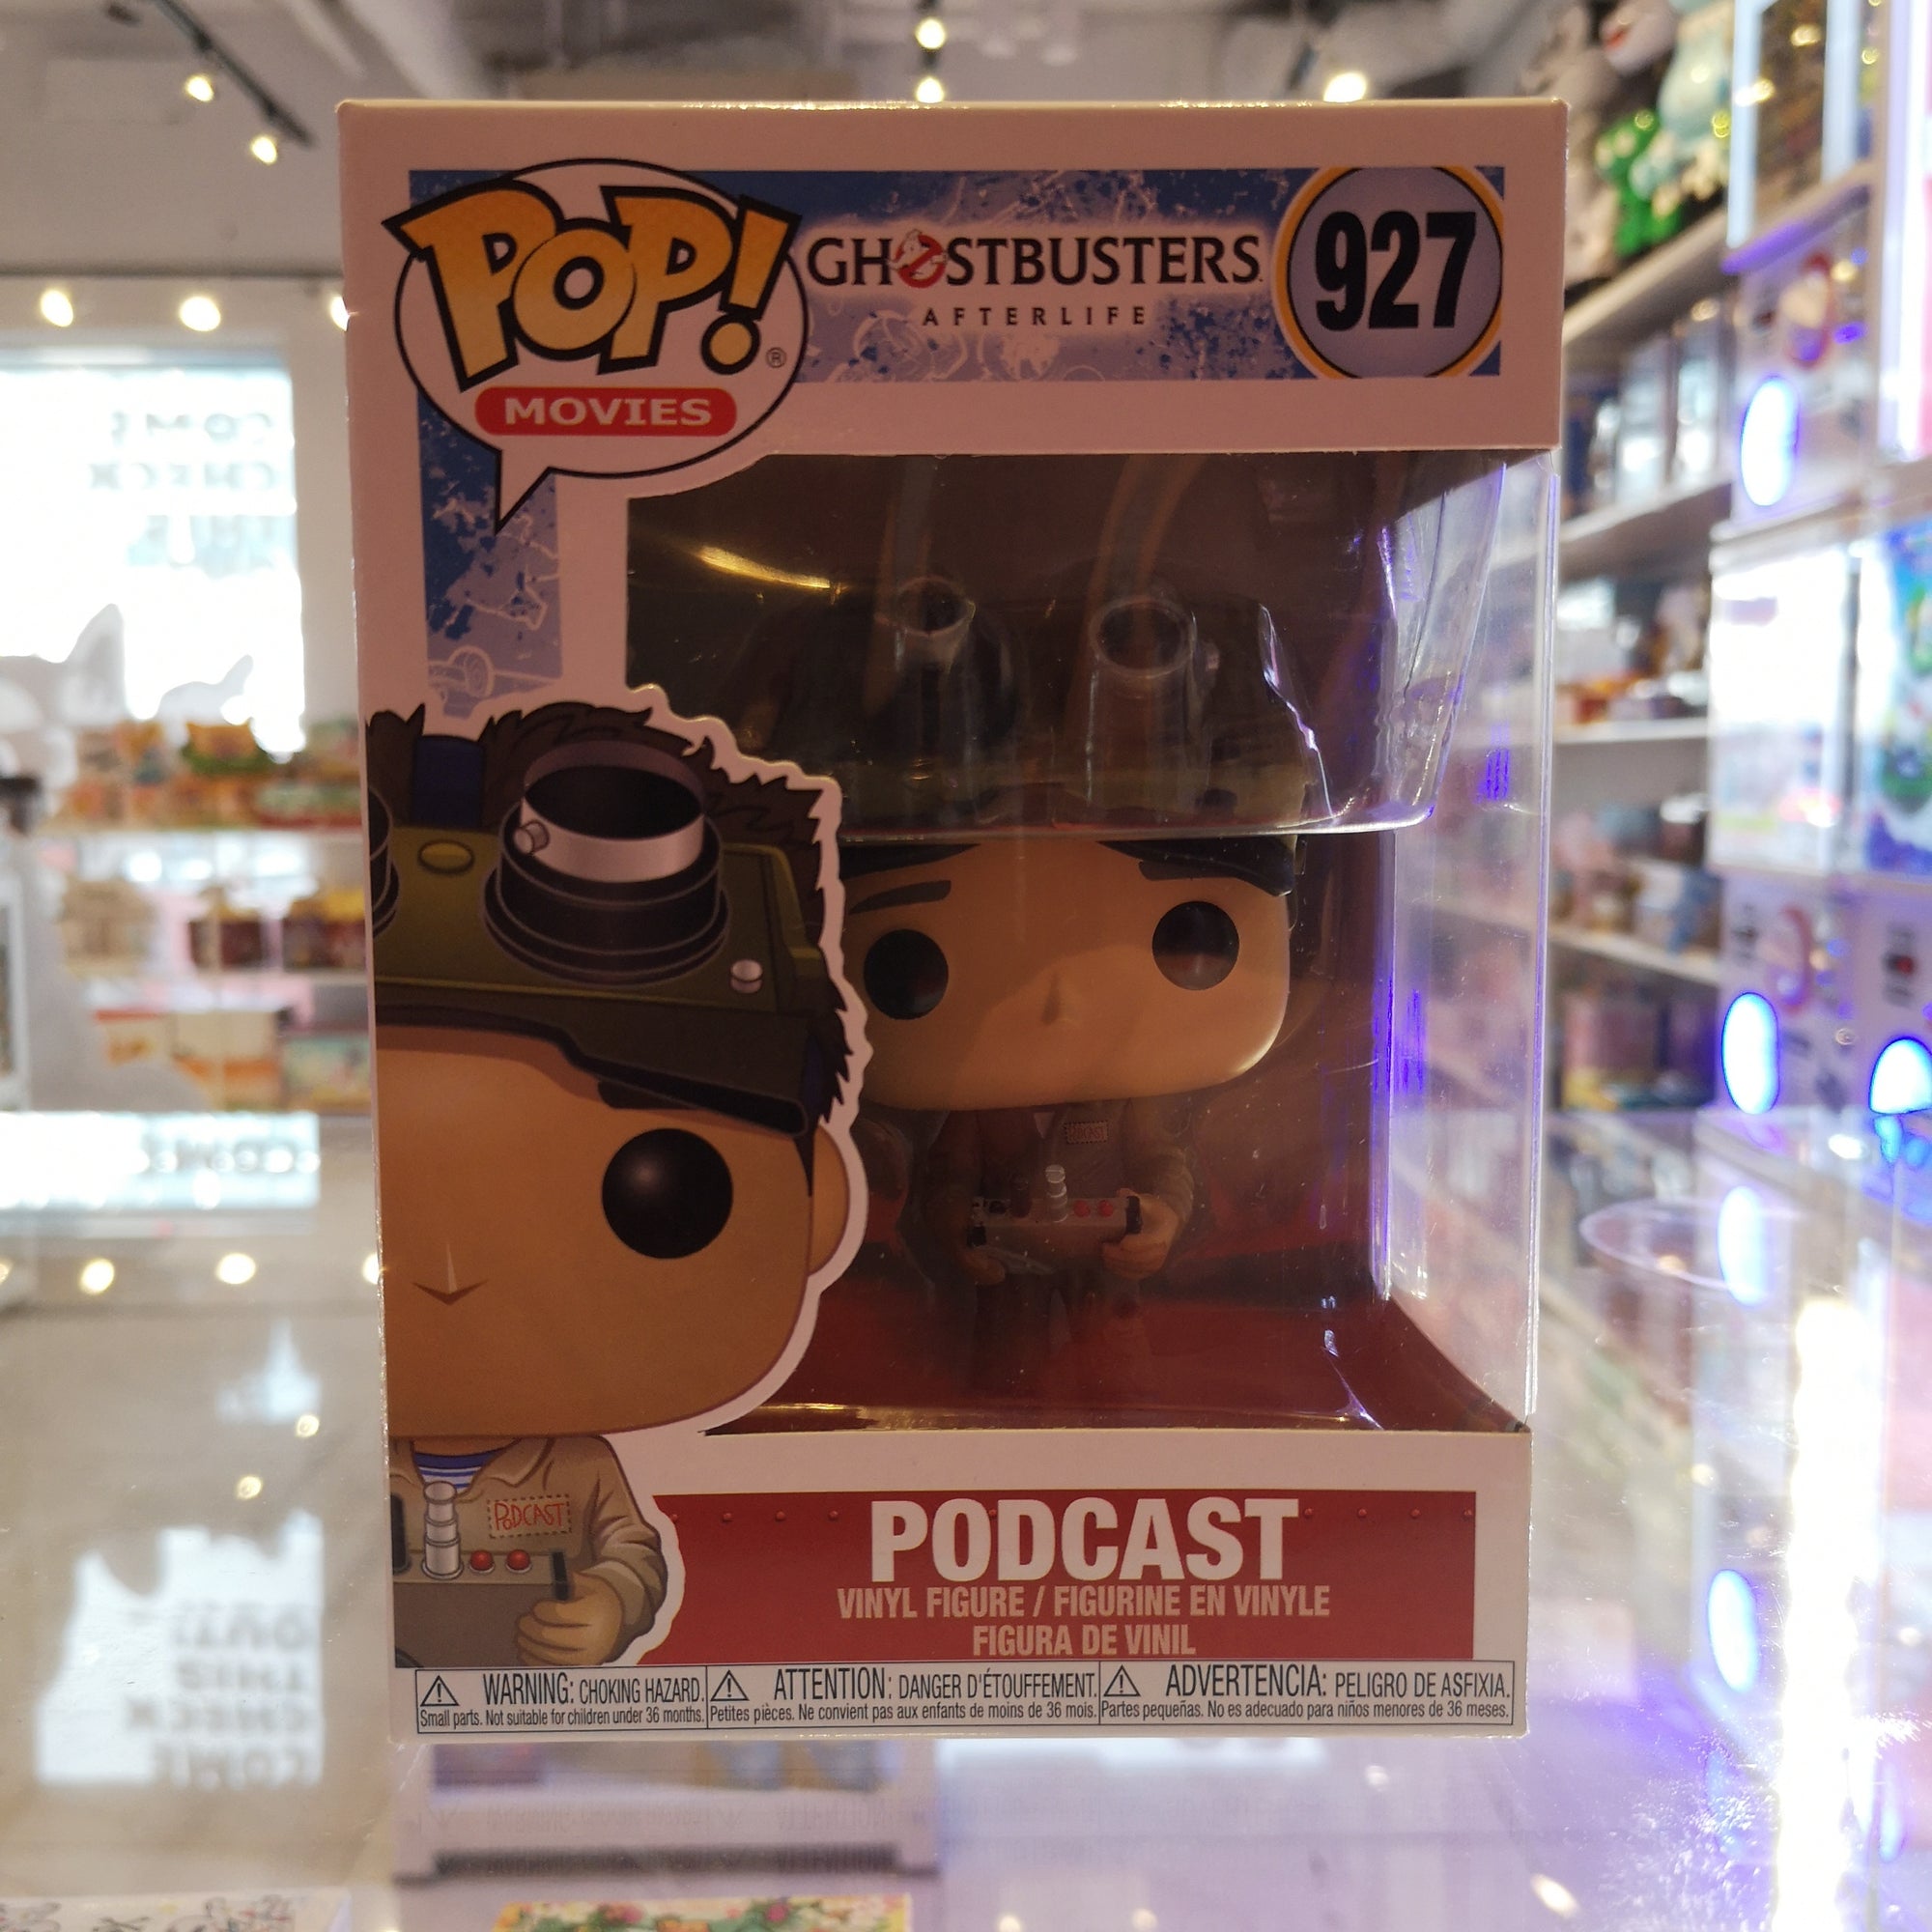 Podcast - Ghostbusters Afterlife Funko POP! by Funko